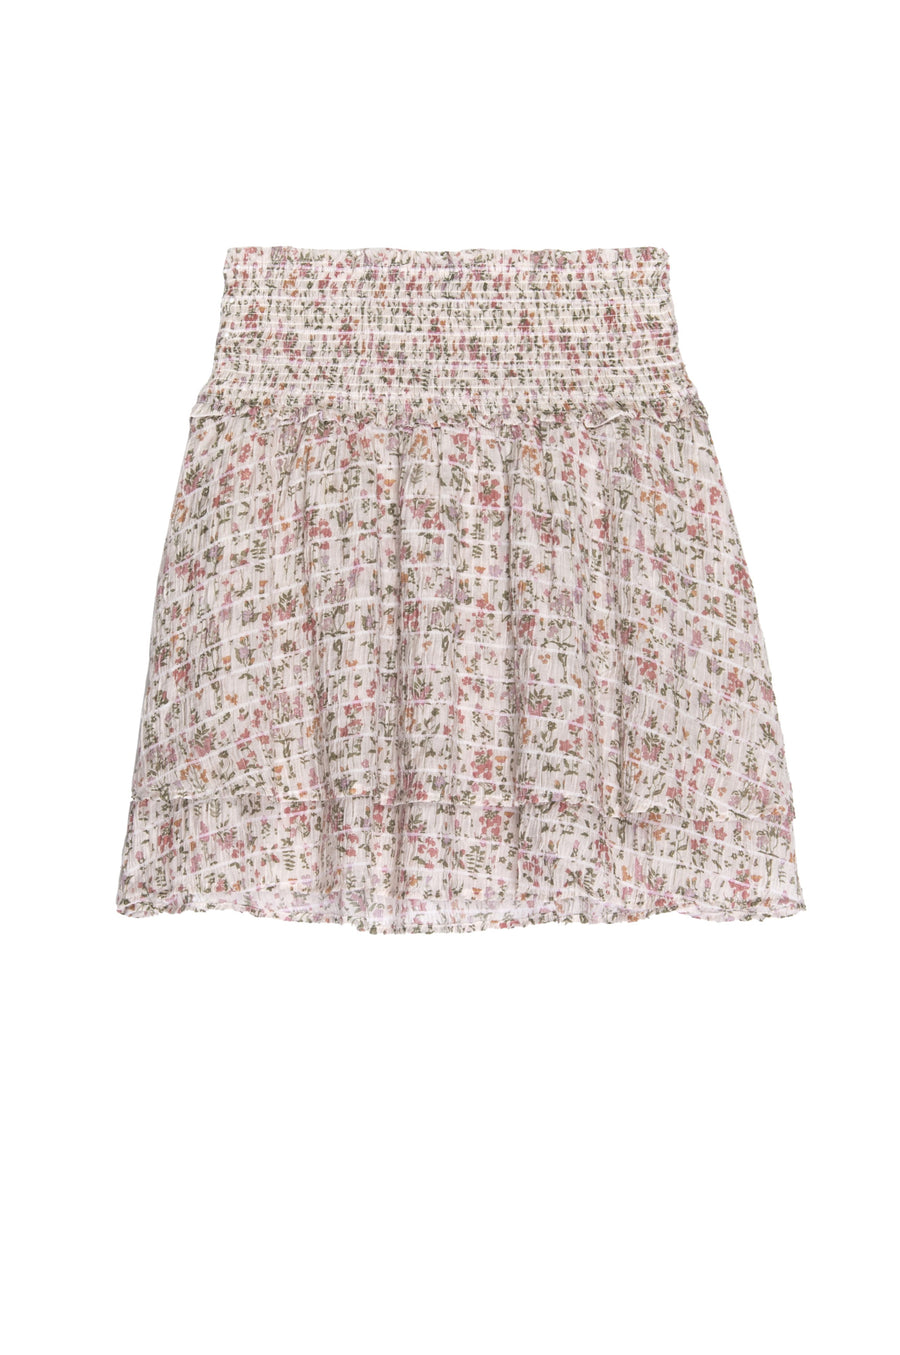 RAILS Addison Skirt in Ambrosia - Extra Small only